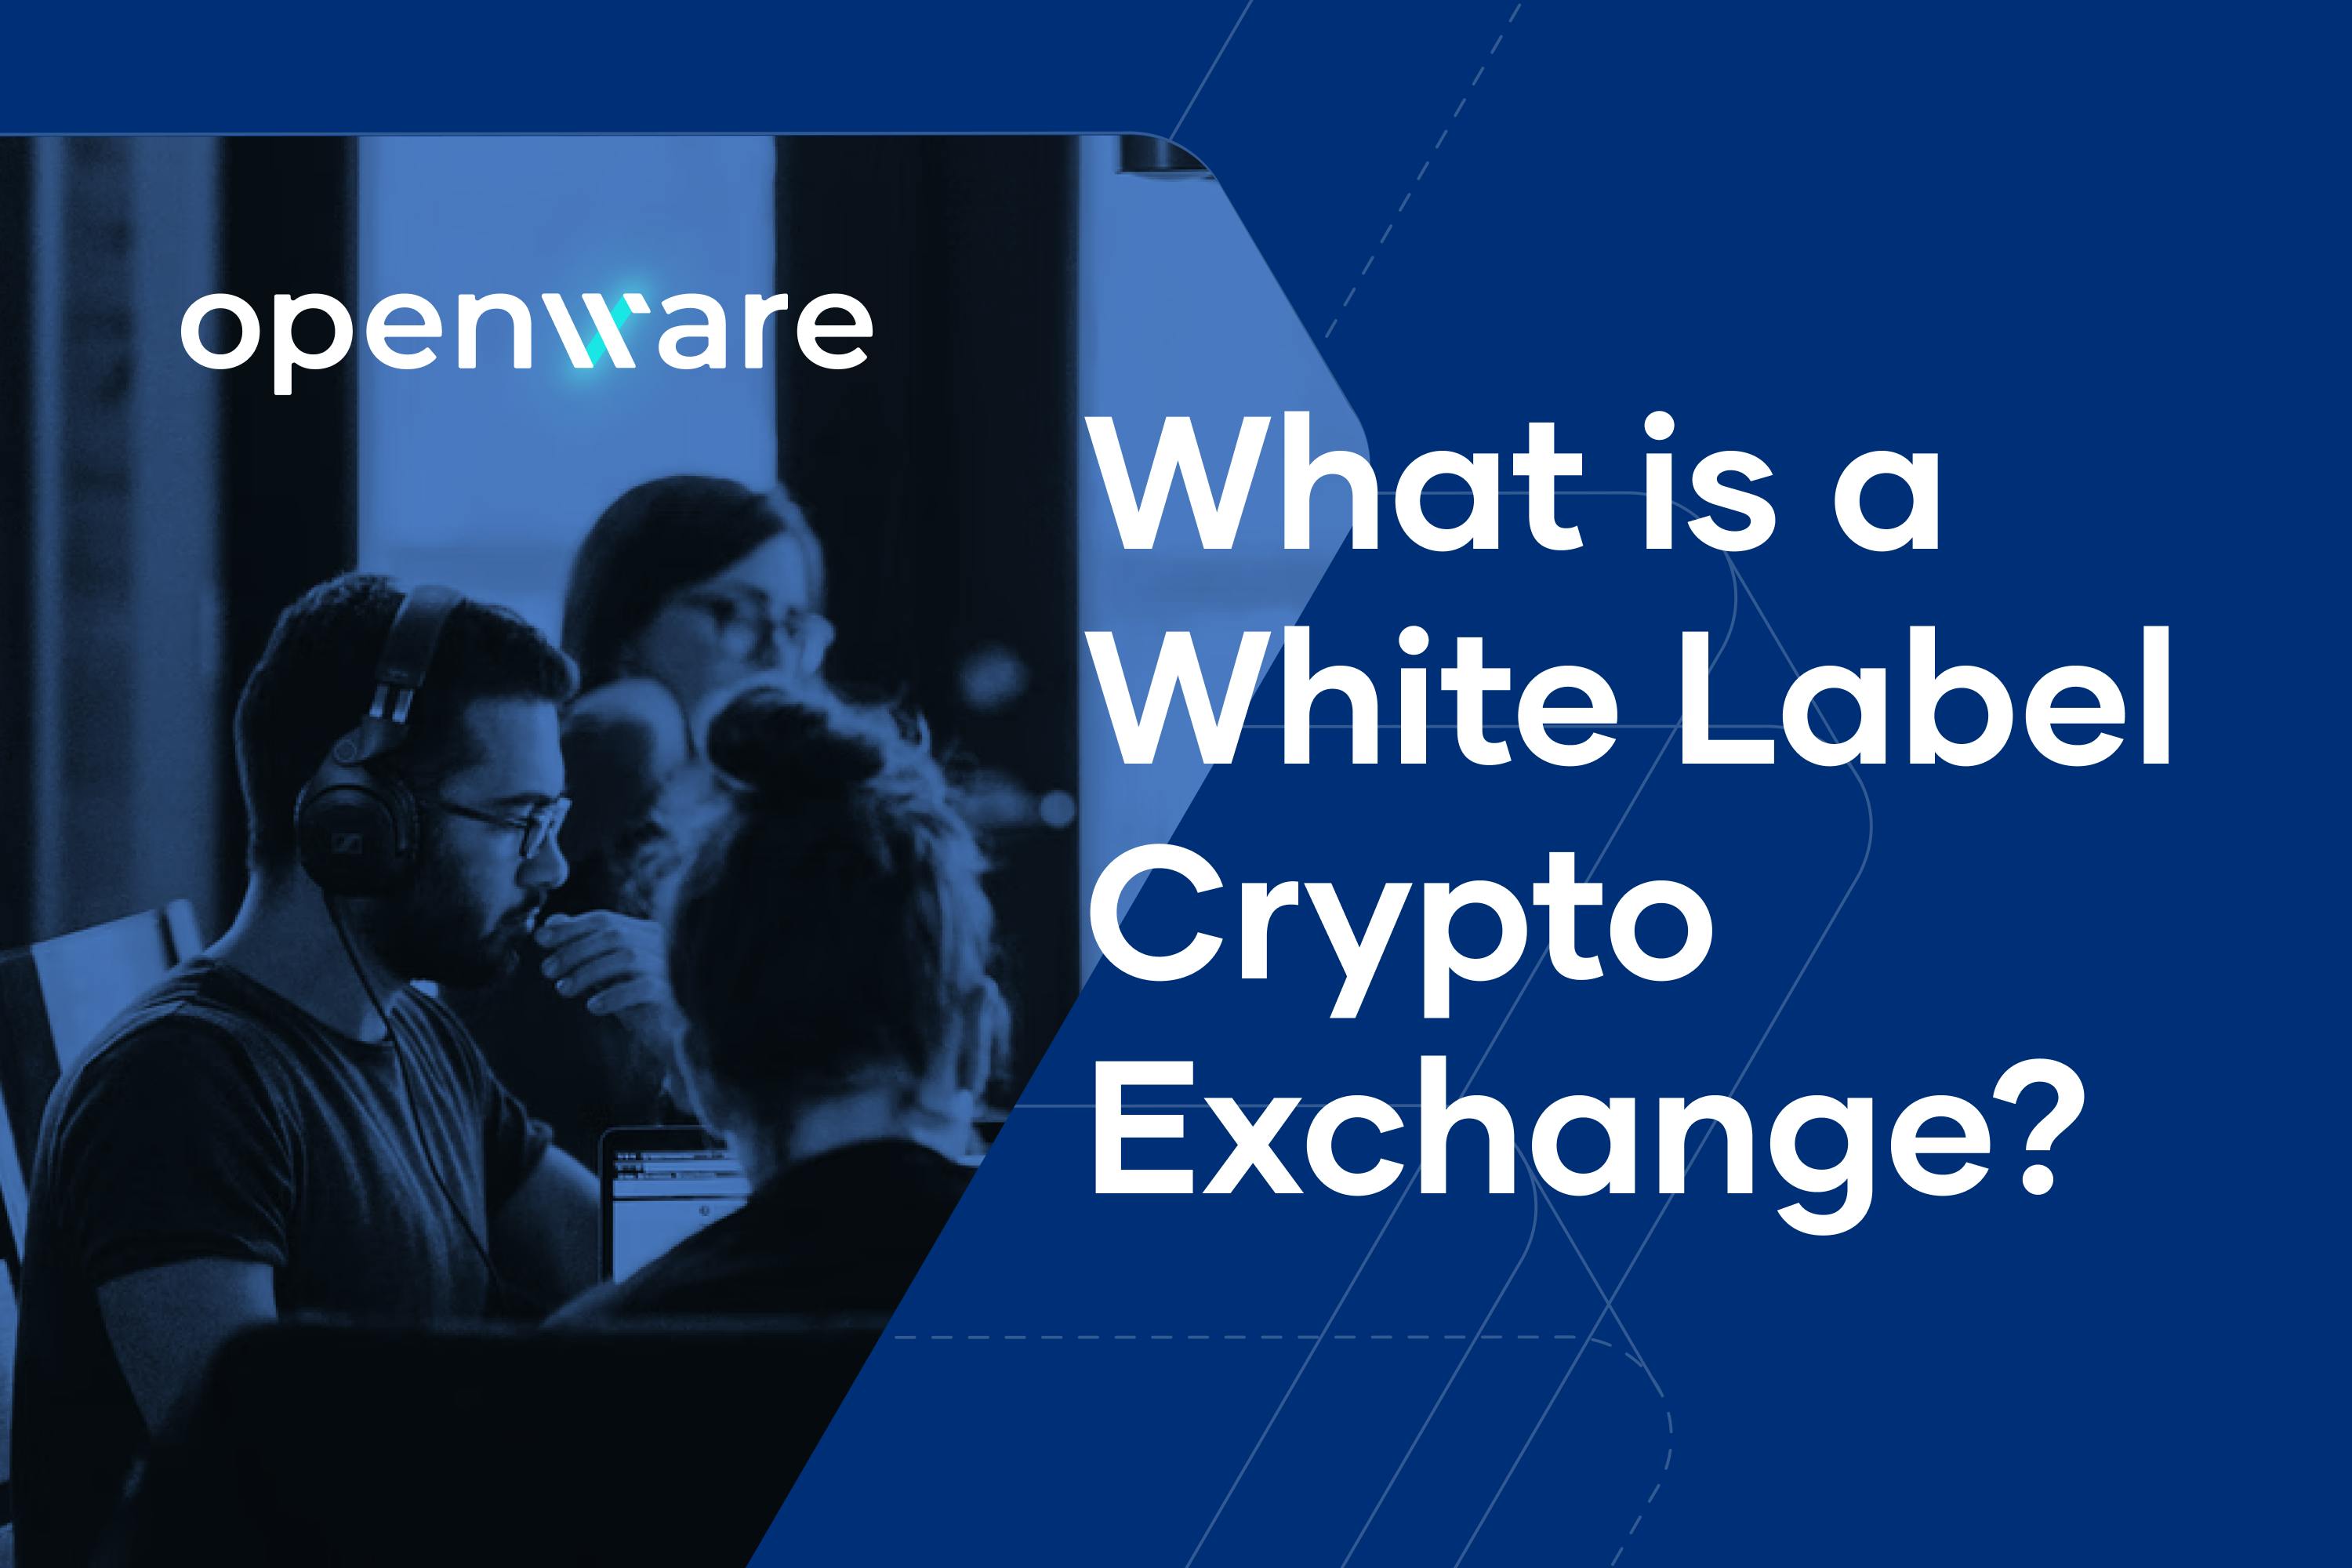 Banner Image showing the words "What is a White Label Crypto Exchange?"